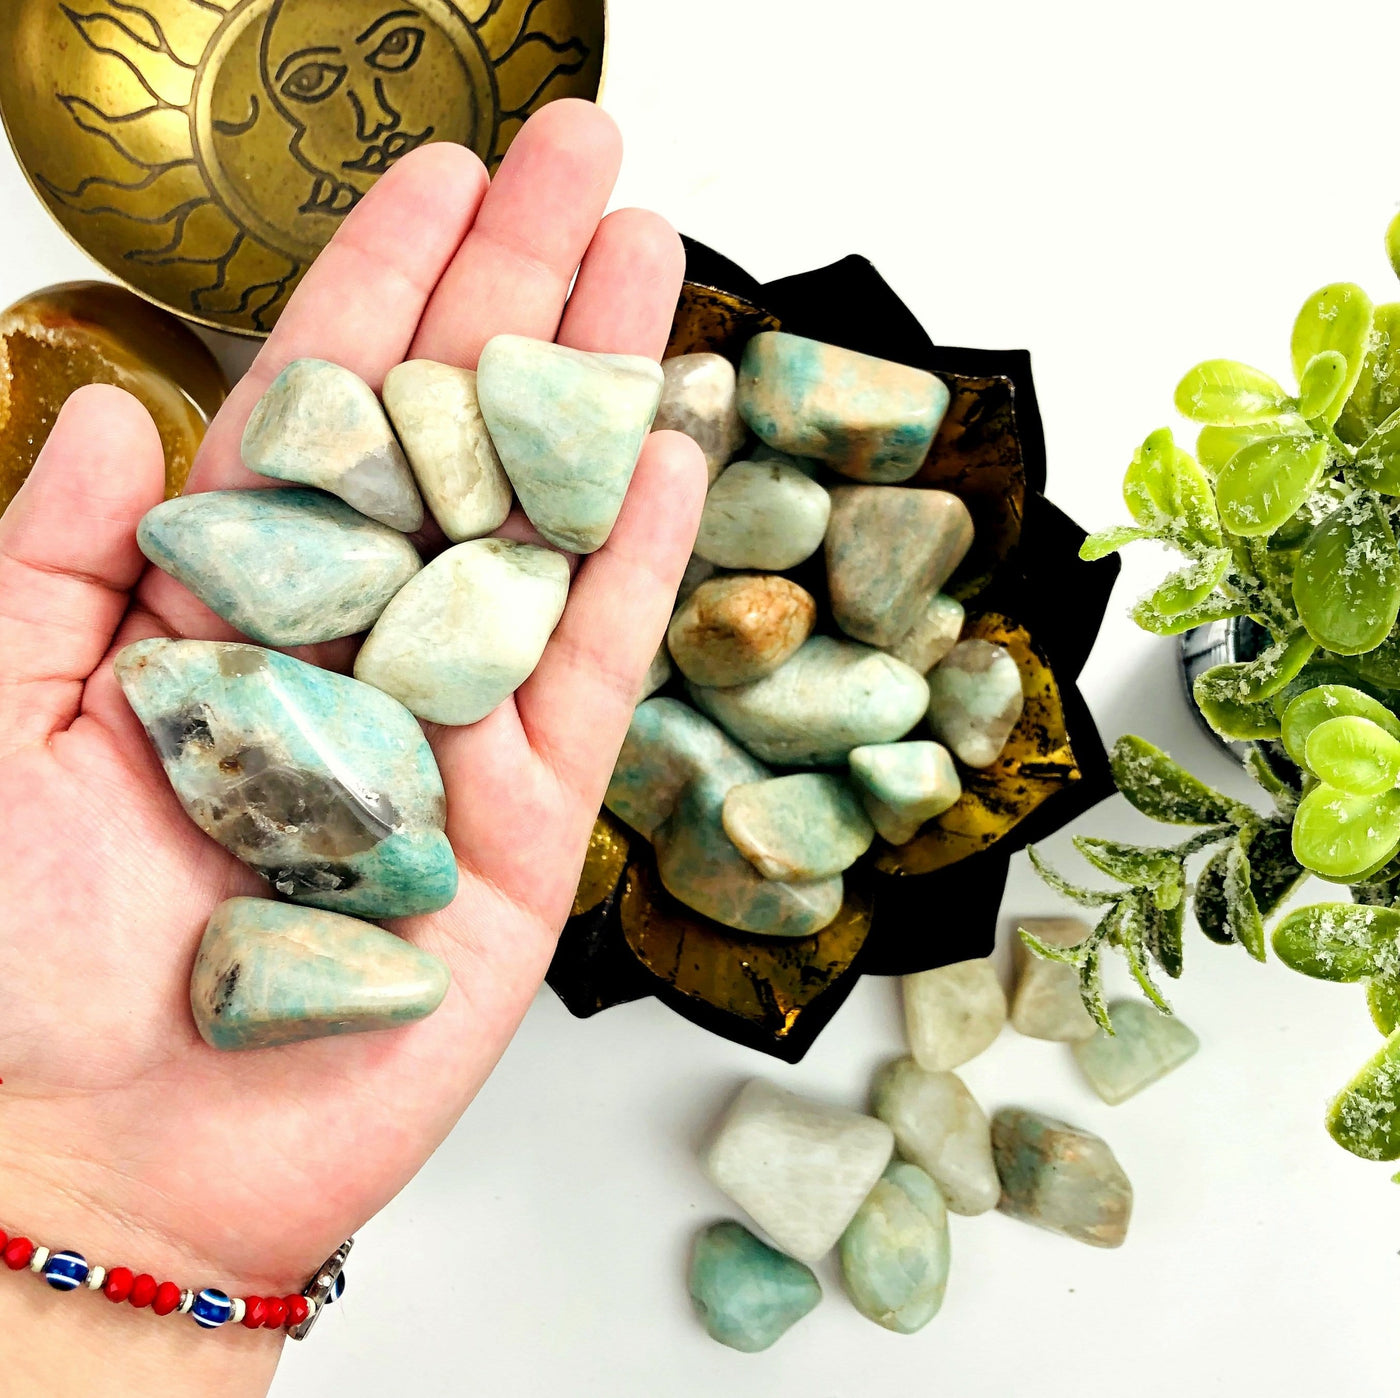 Tumbled stones are being held for size reference.